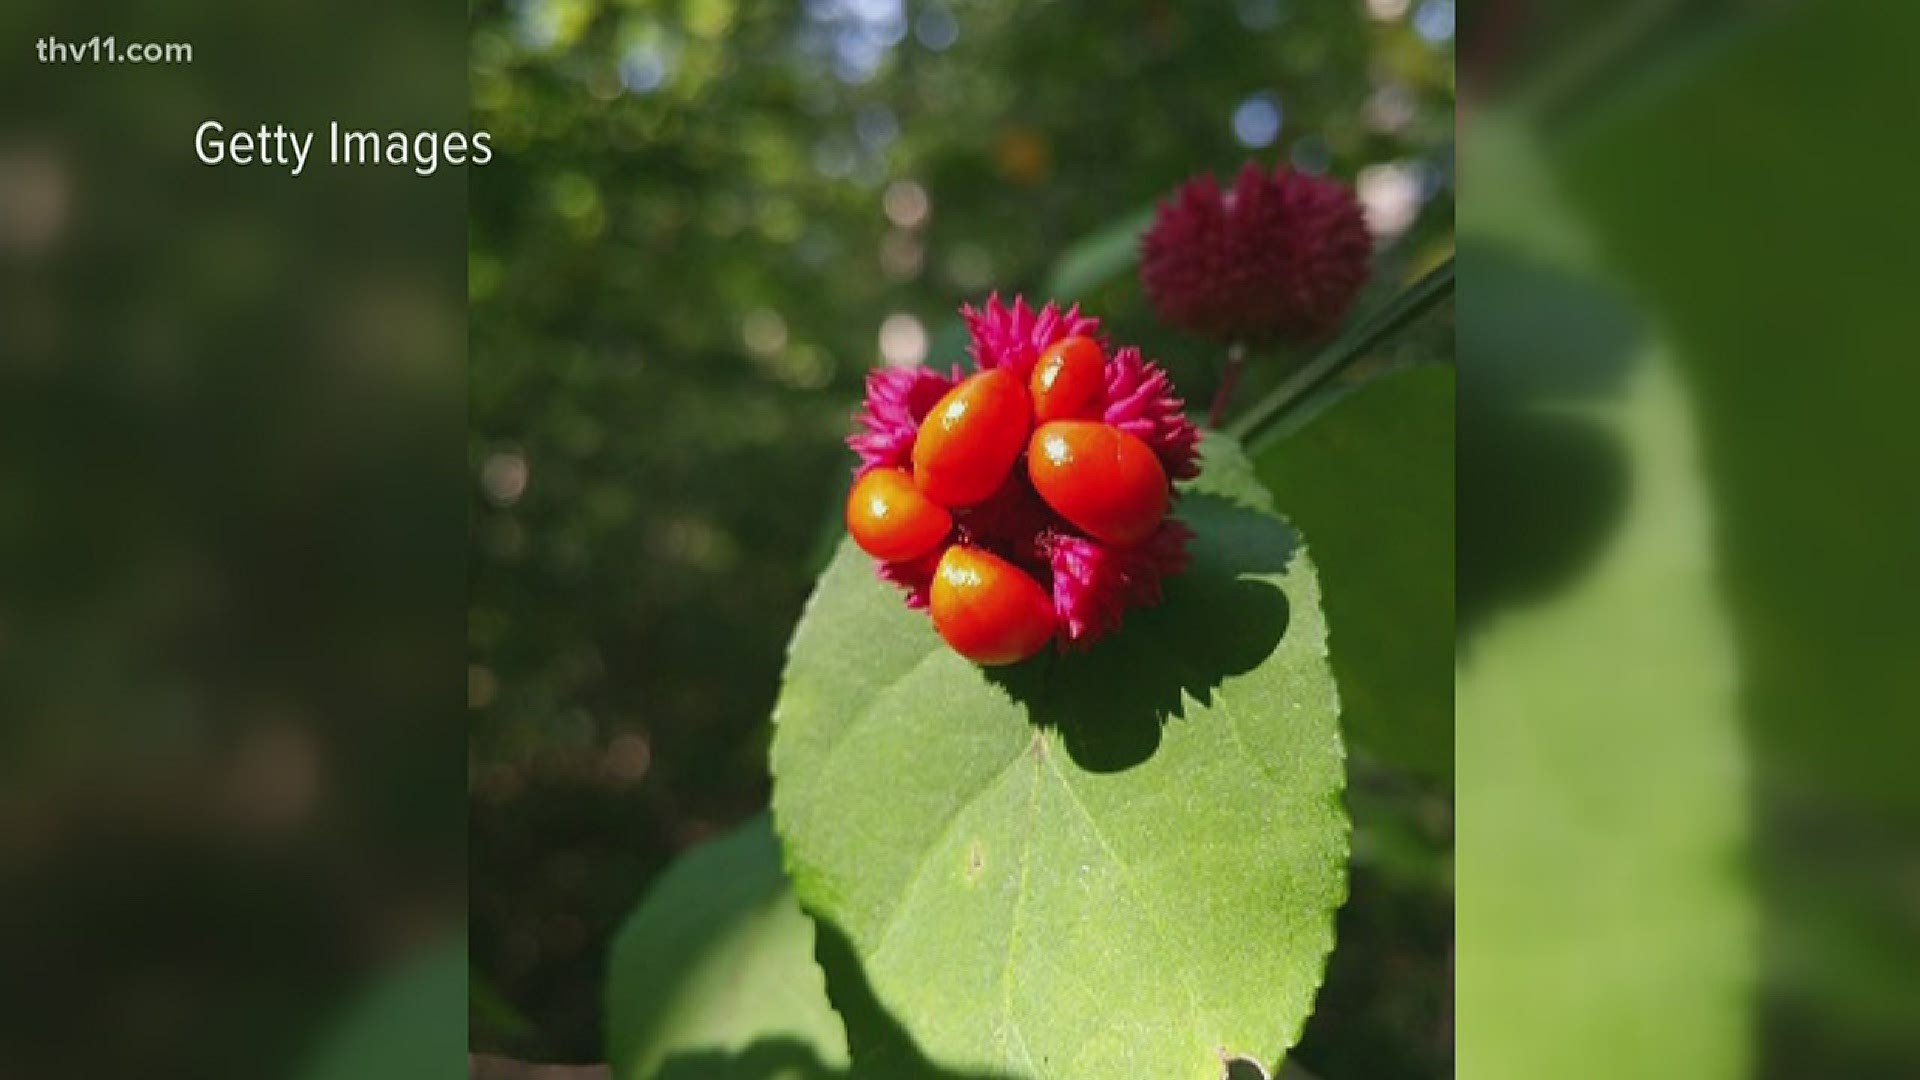 Audubon Arkansas is holding an online plant sale to encourage planting of native plants which are vital for birds.